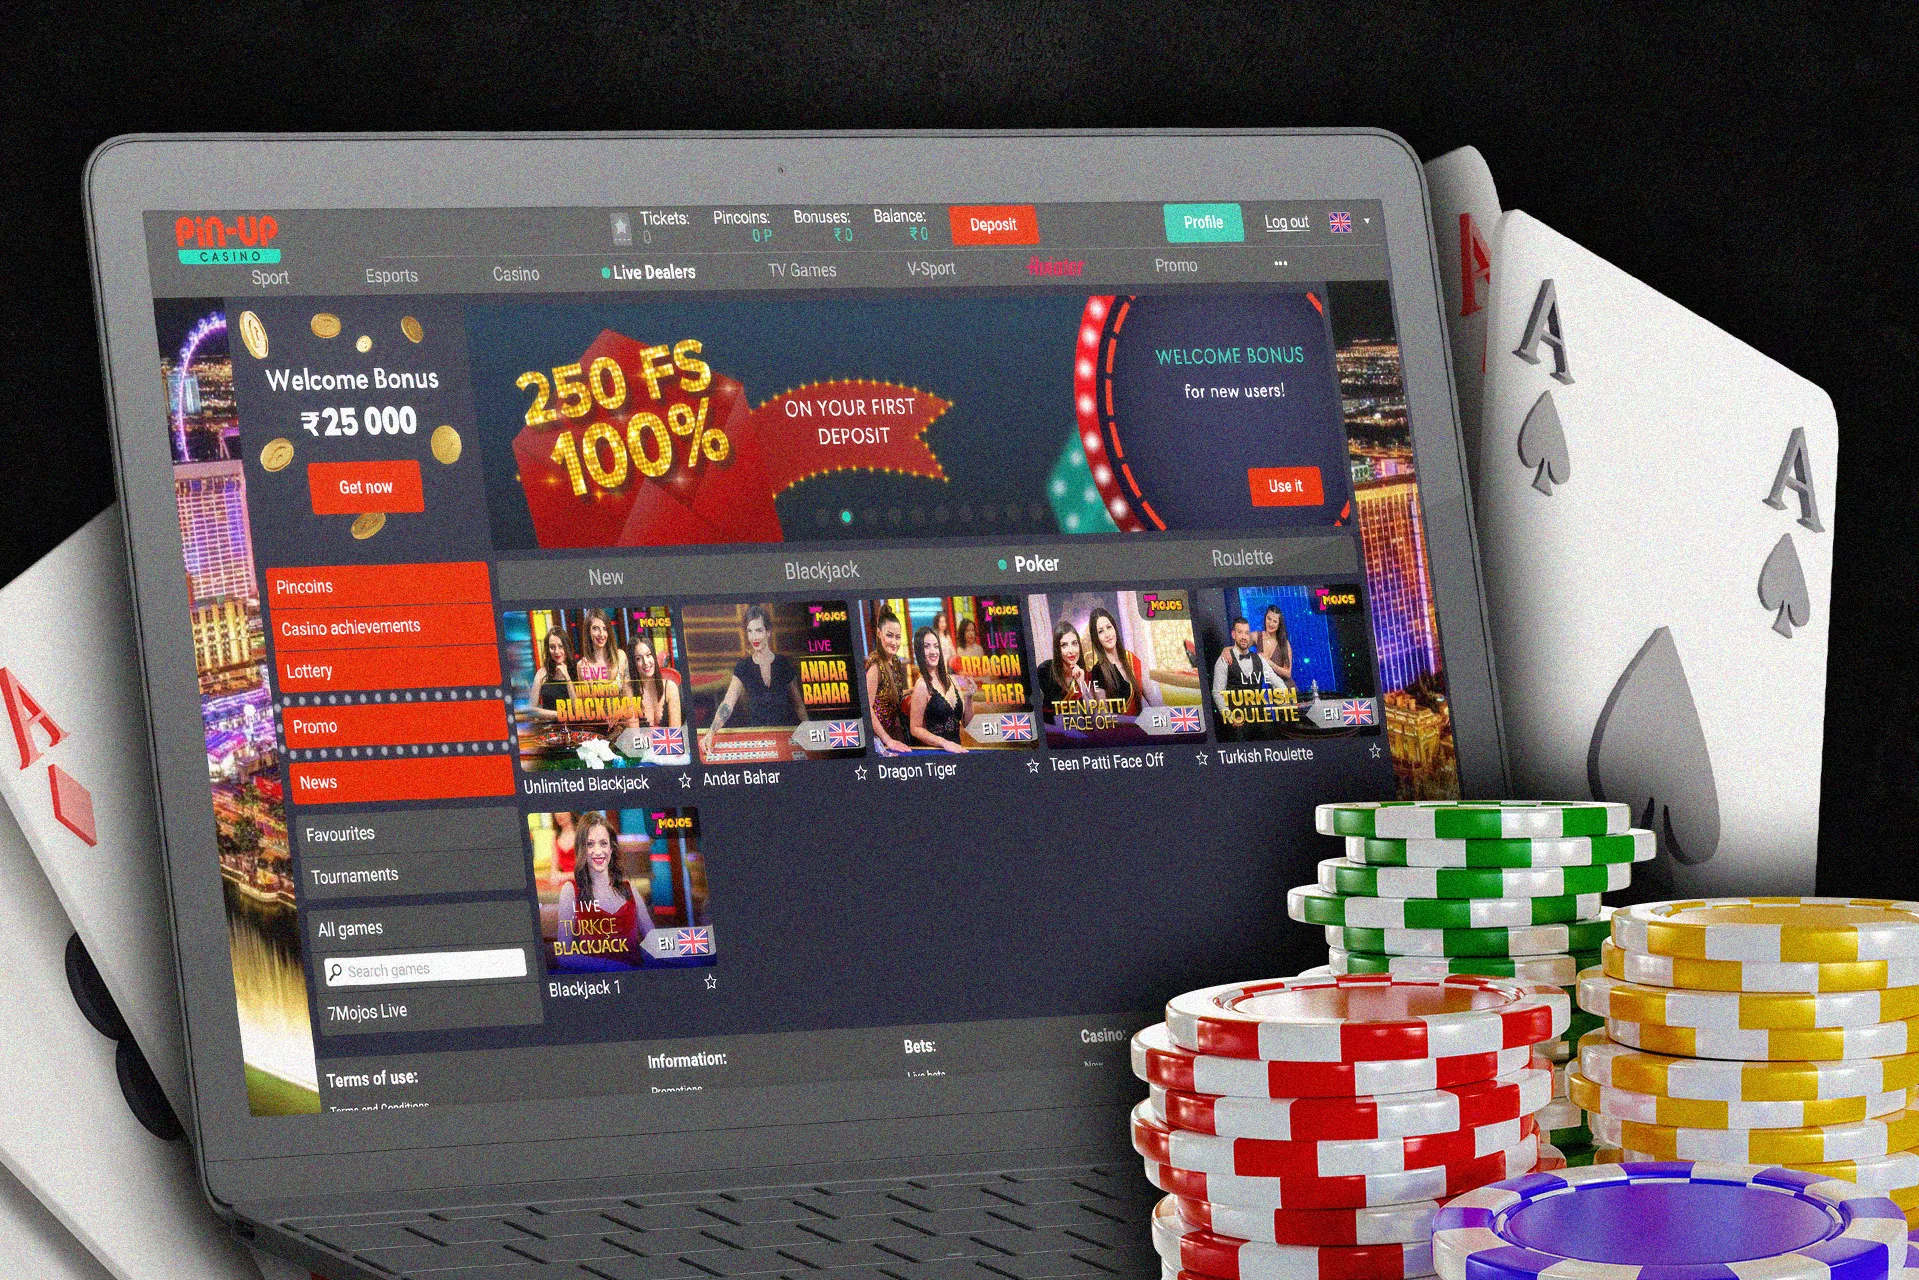 You can play poker games in the Pin-Up casino.